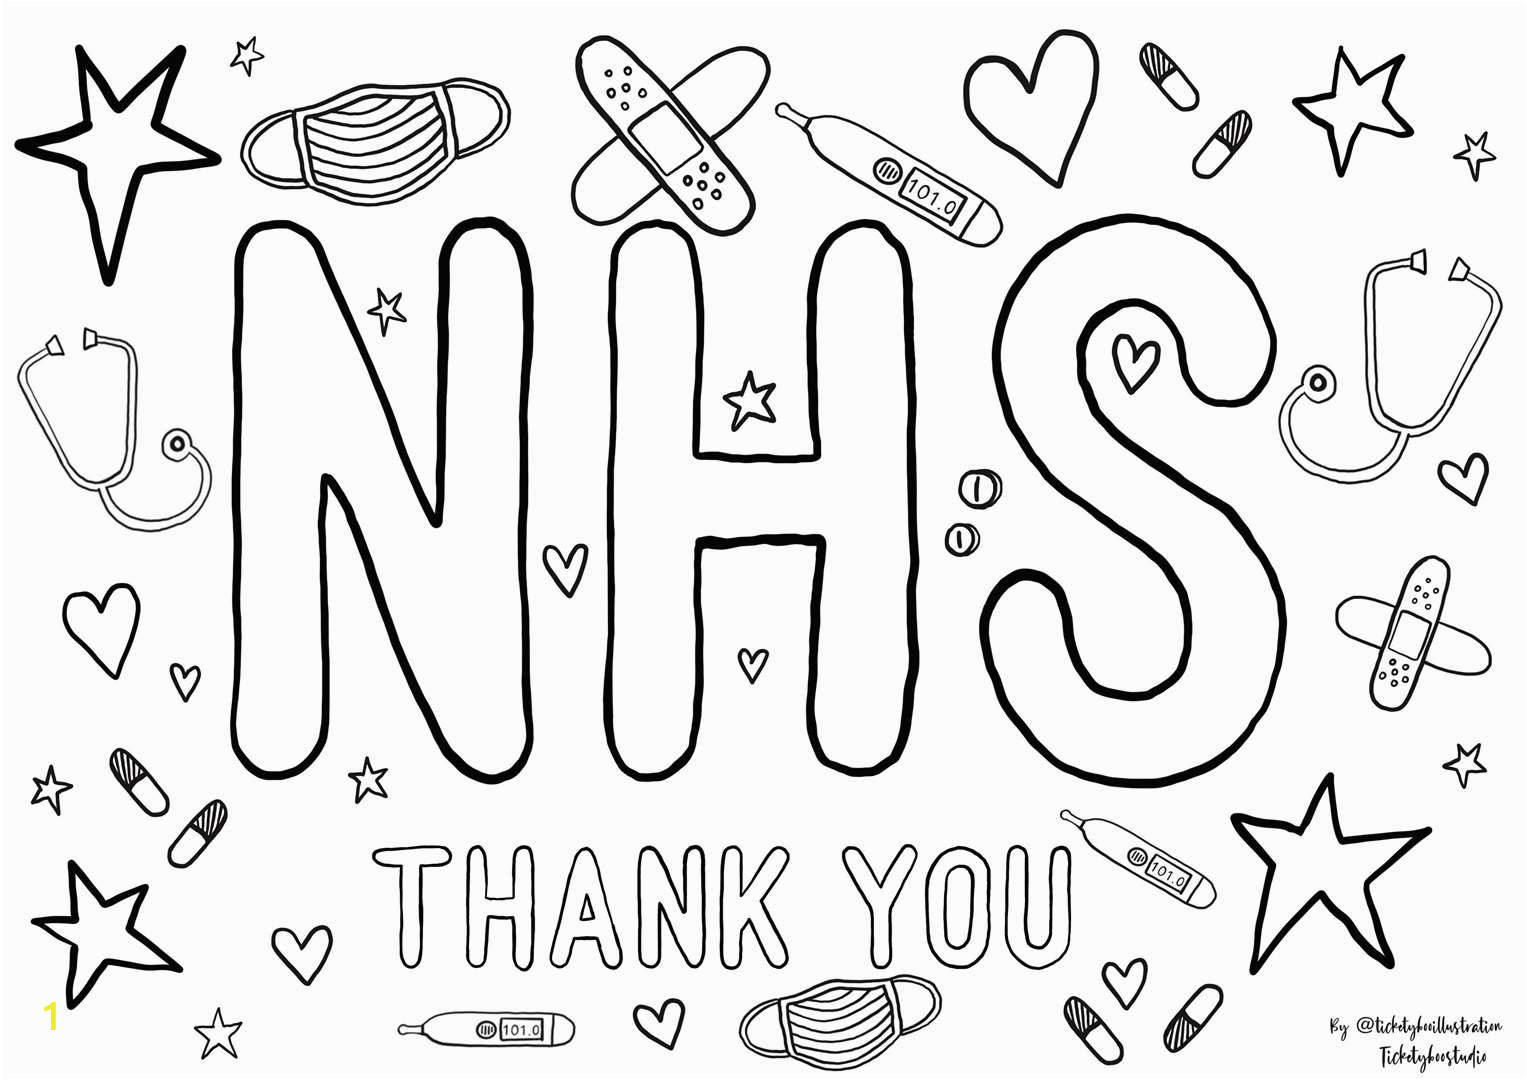 Coloring Pages for Your Boyfriend Coronavirus Show Your Appreciation for Our Nhs Heroes by